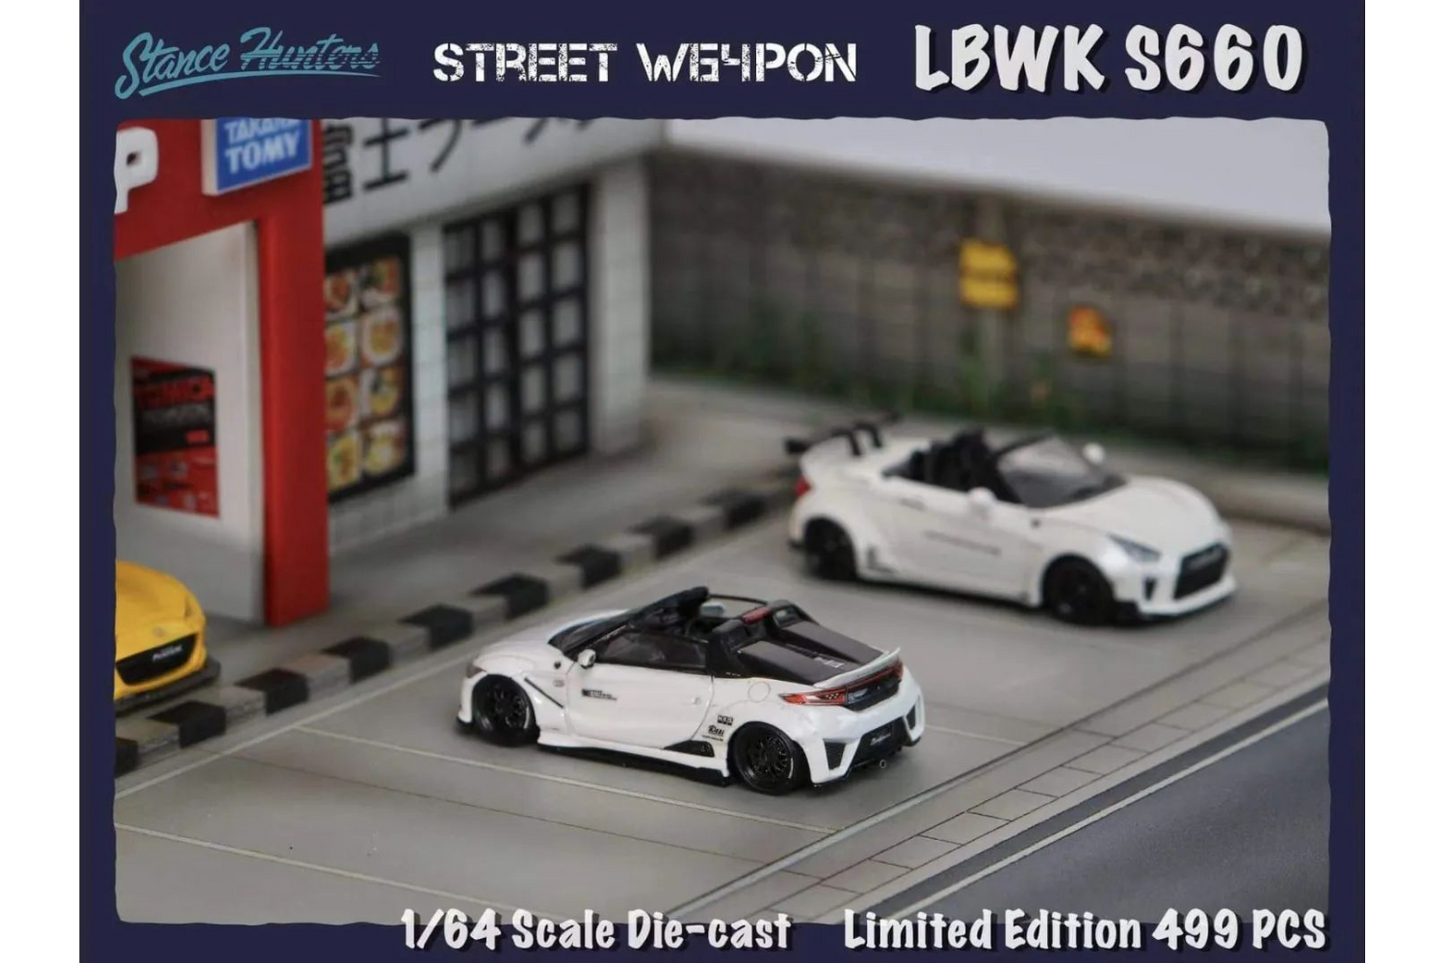 Stance Hunters x Street Weapon 1/64 Honda S660 LBWK in Yellow